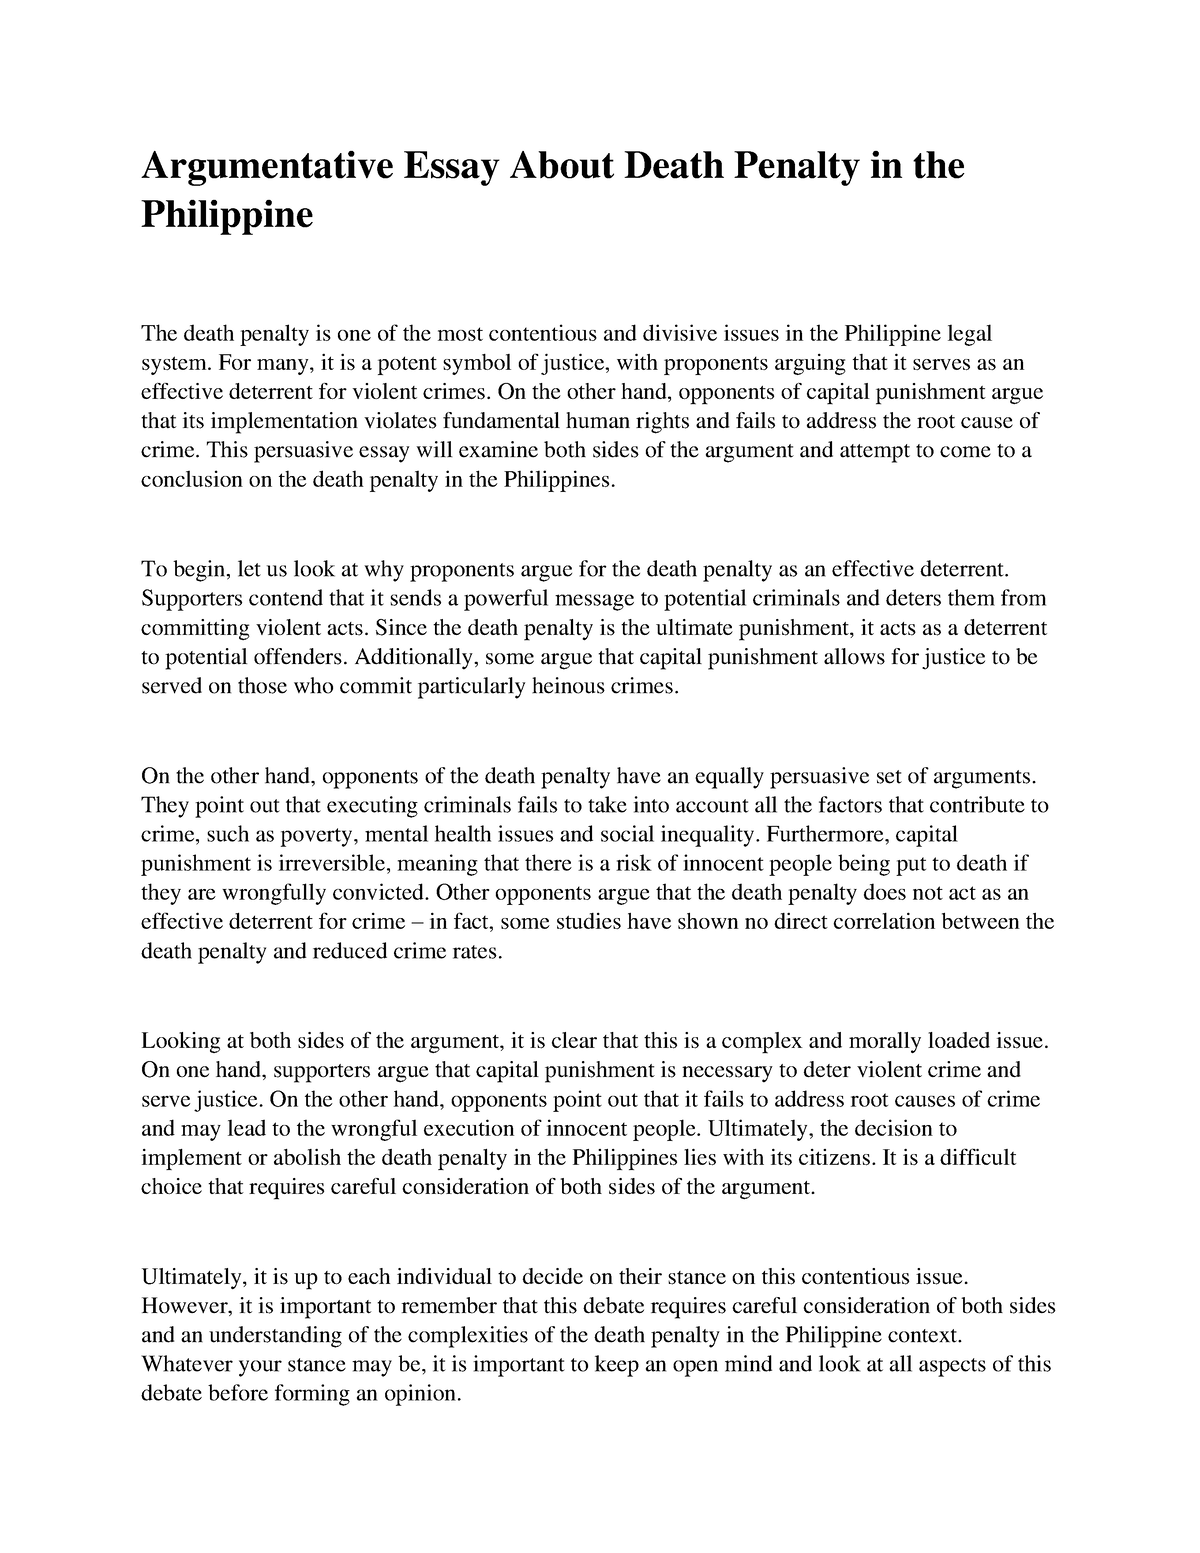 research paper about death penalty in the philippines